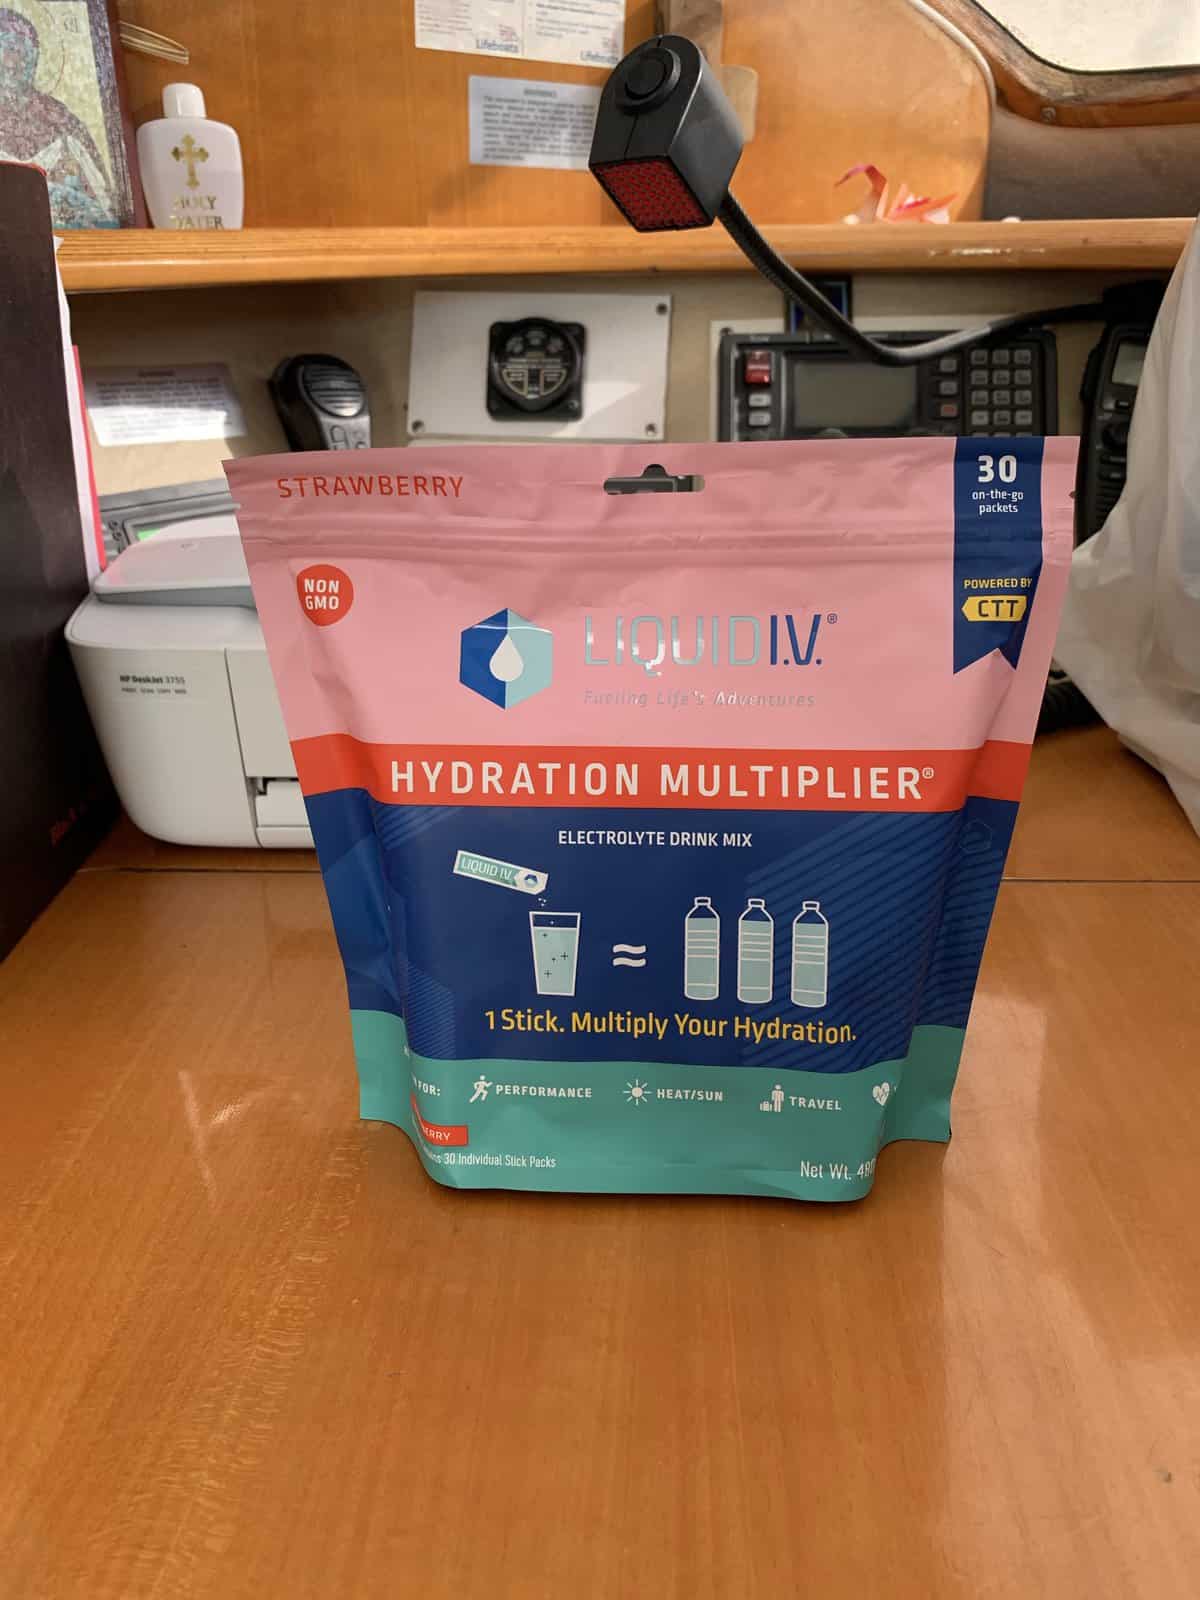 Liquid IV hydration in small packages